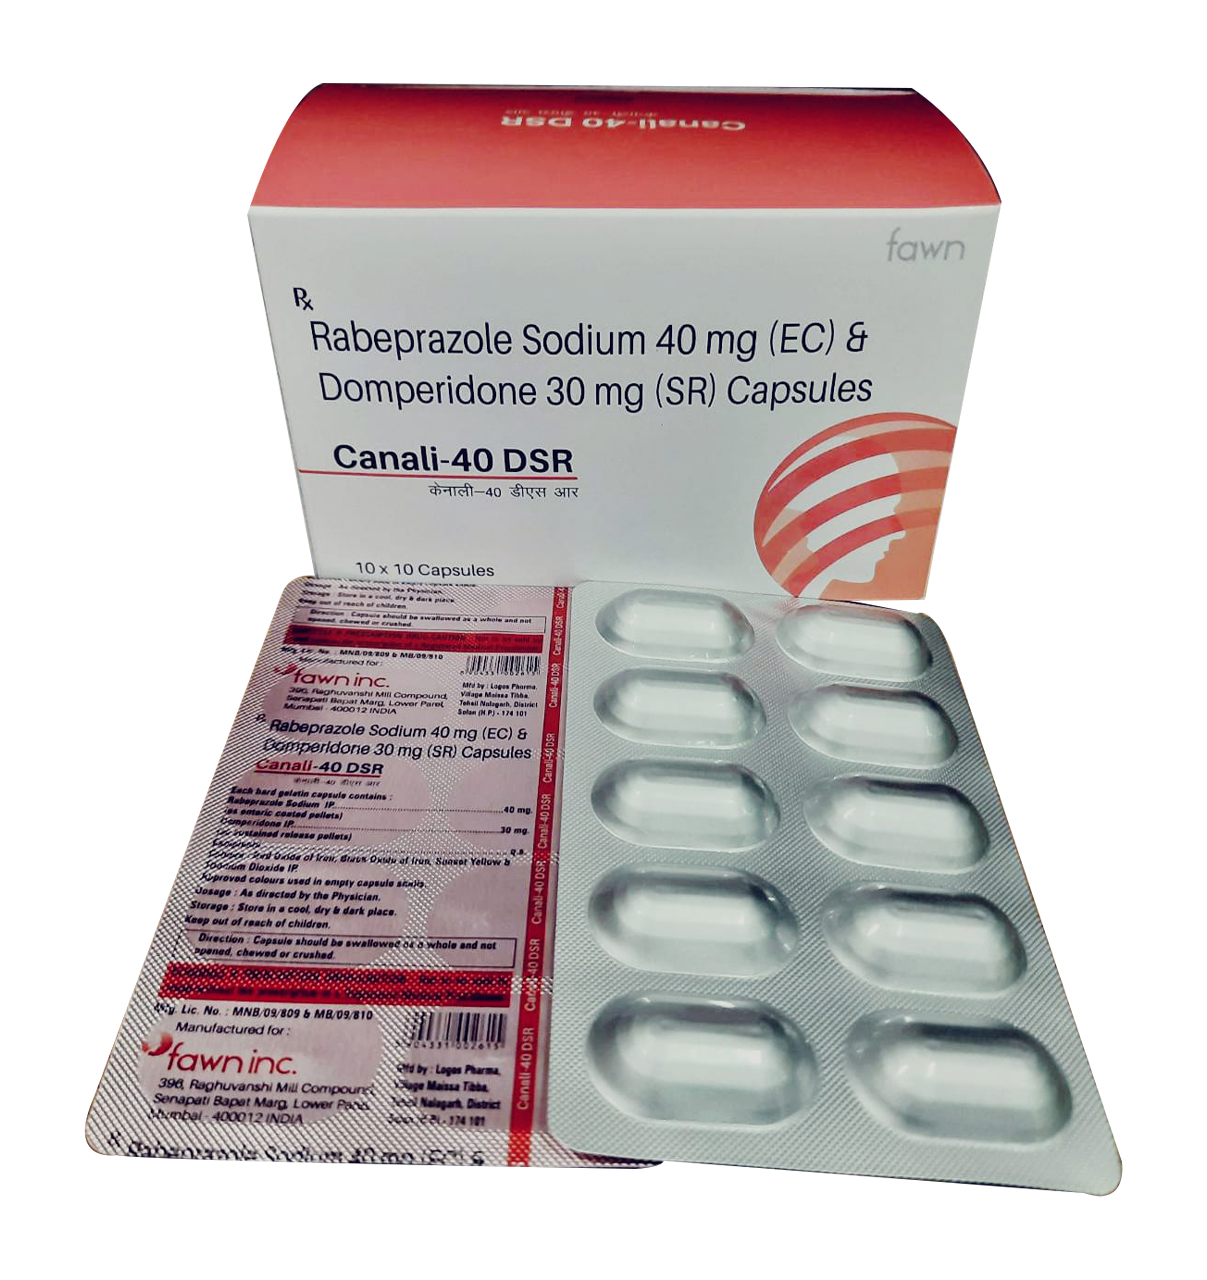 Product Name: CANALI 40 DSR, Compositions of Rabeprazole Sodium (EC) 40 mg + Domperidone 30 (SR) 30 mg. are Rabeprazole Sodium (EC) 40 mg + Domperidone 30 (SR) 30 mg. - Fawn Incorporation